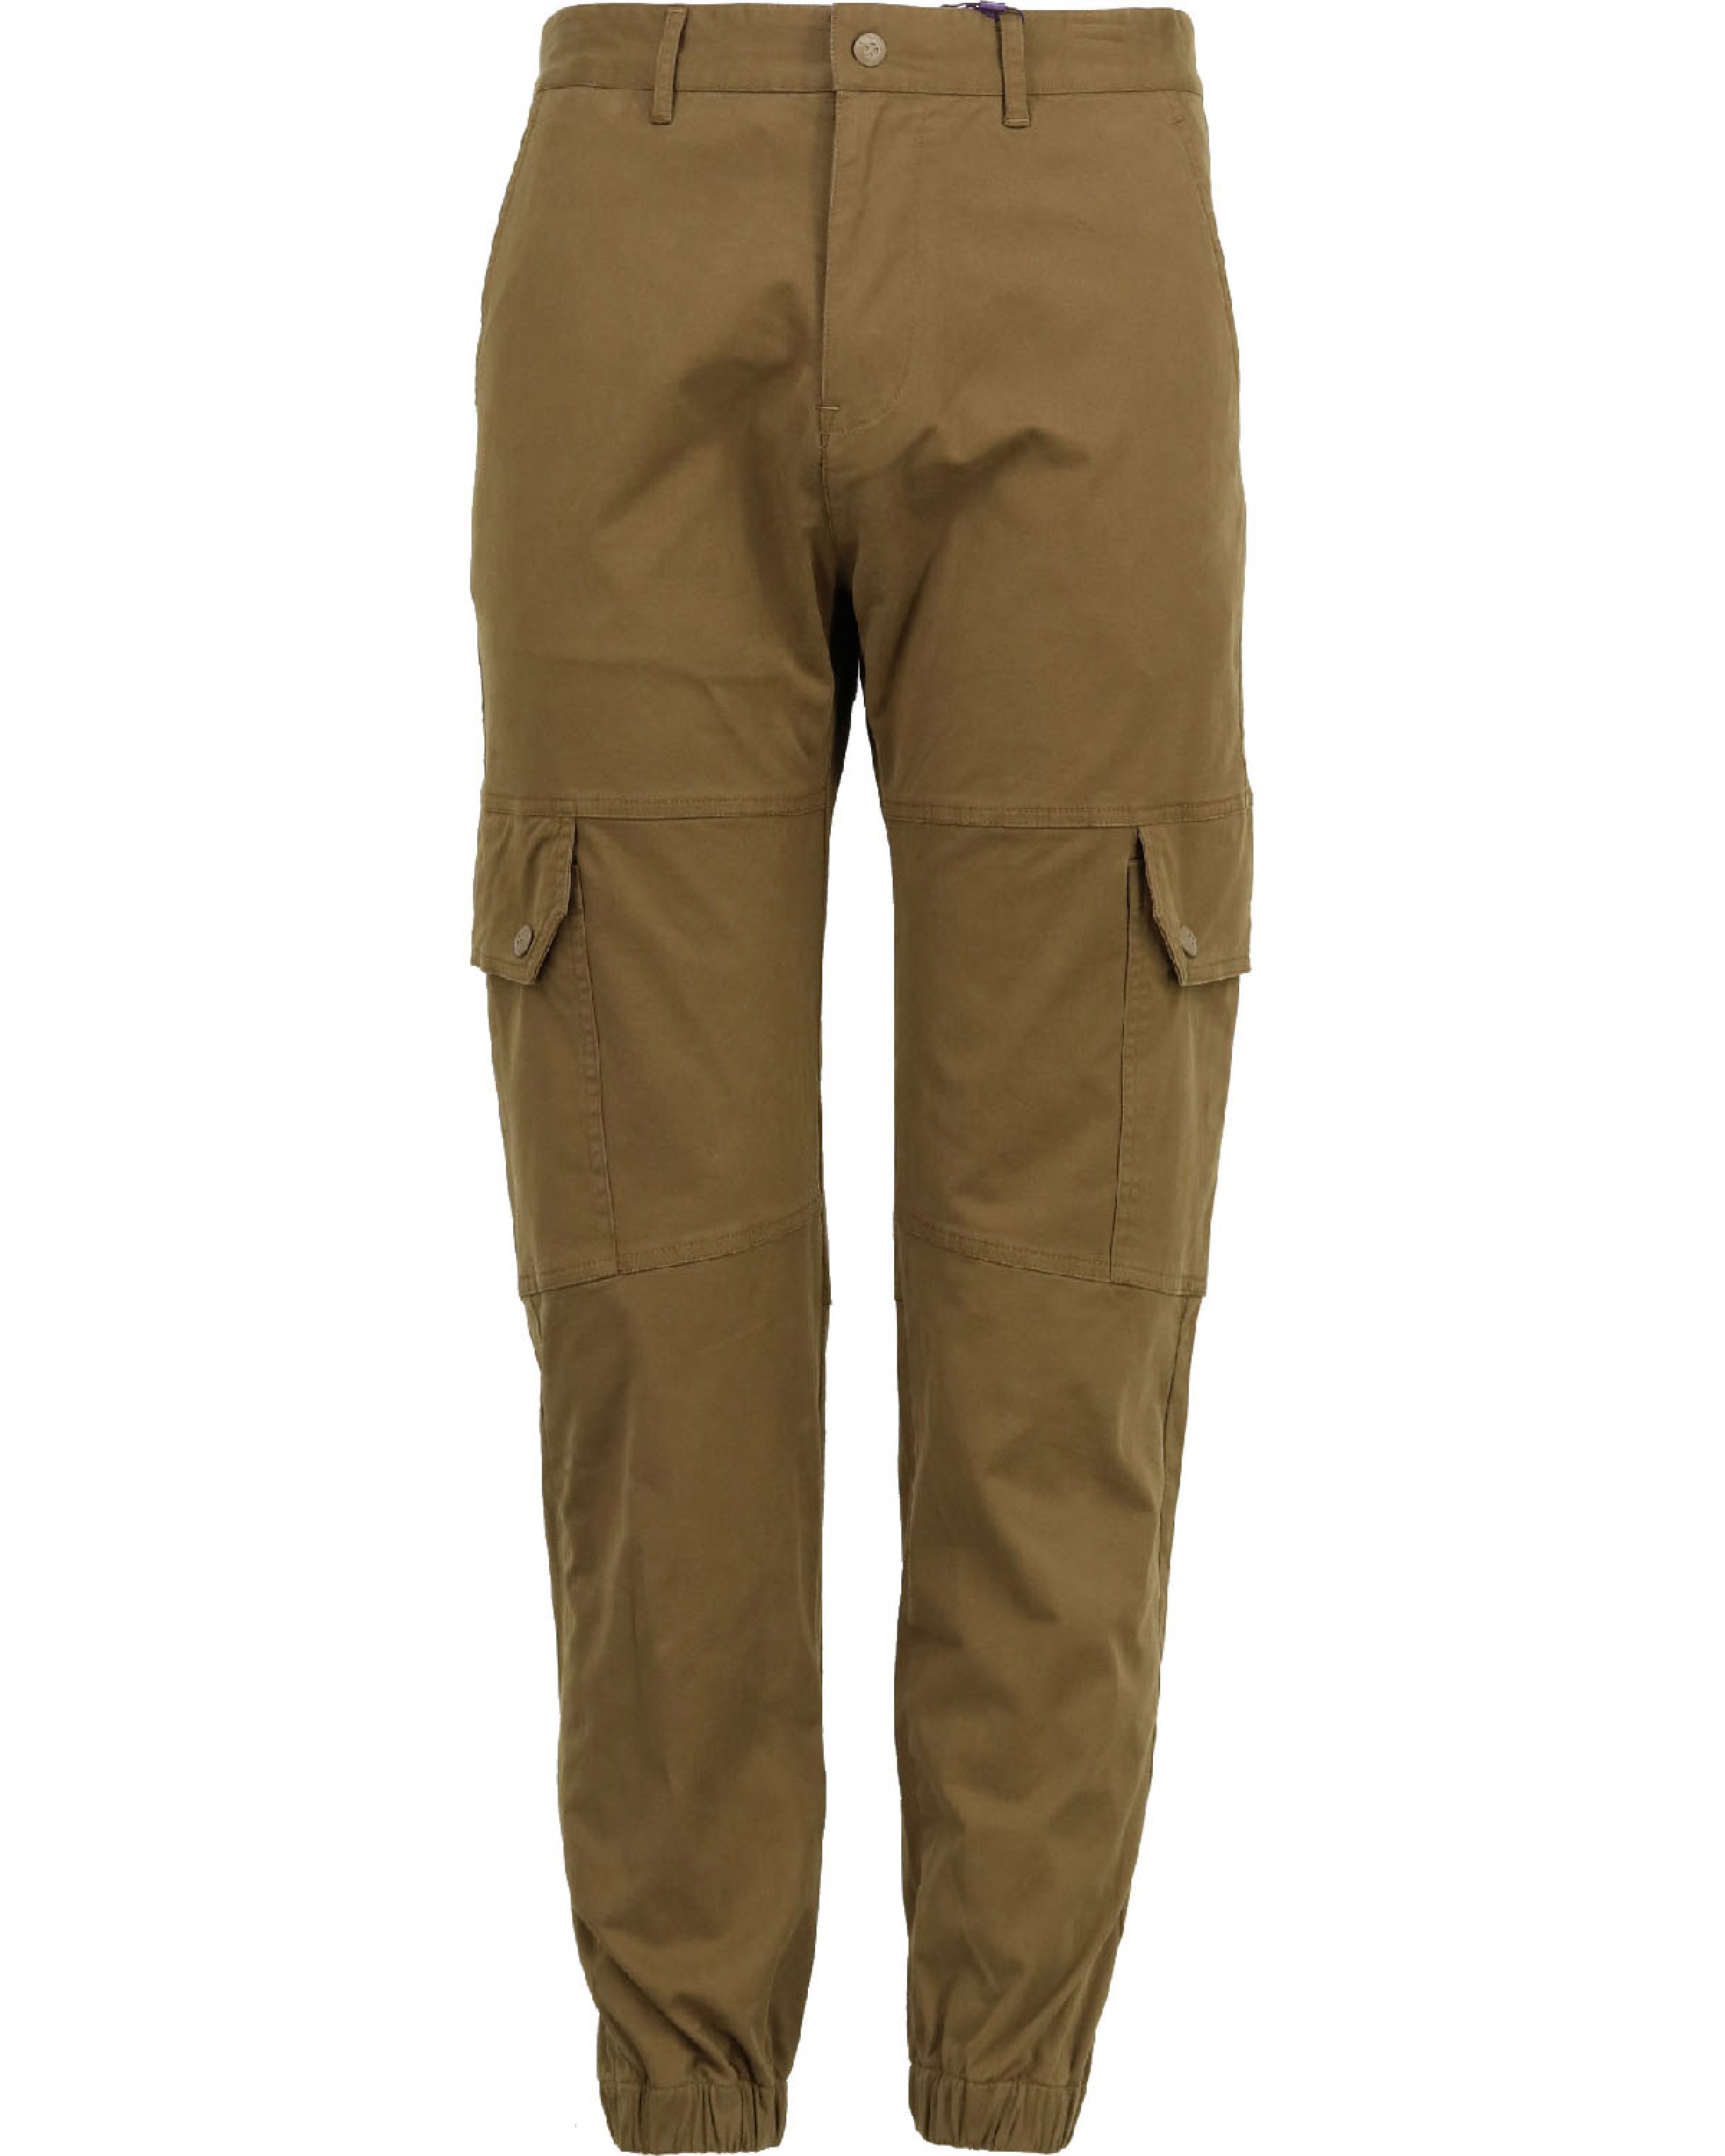 GI Taupe Cargo Pants – Lords Of Harlech